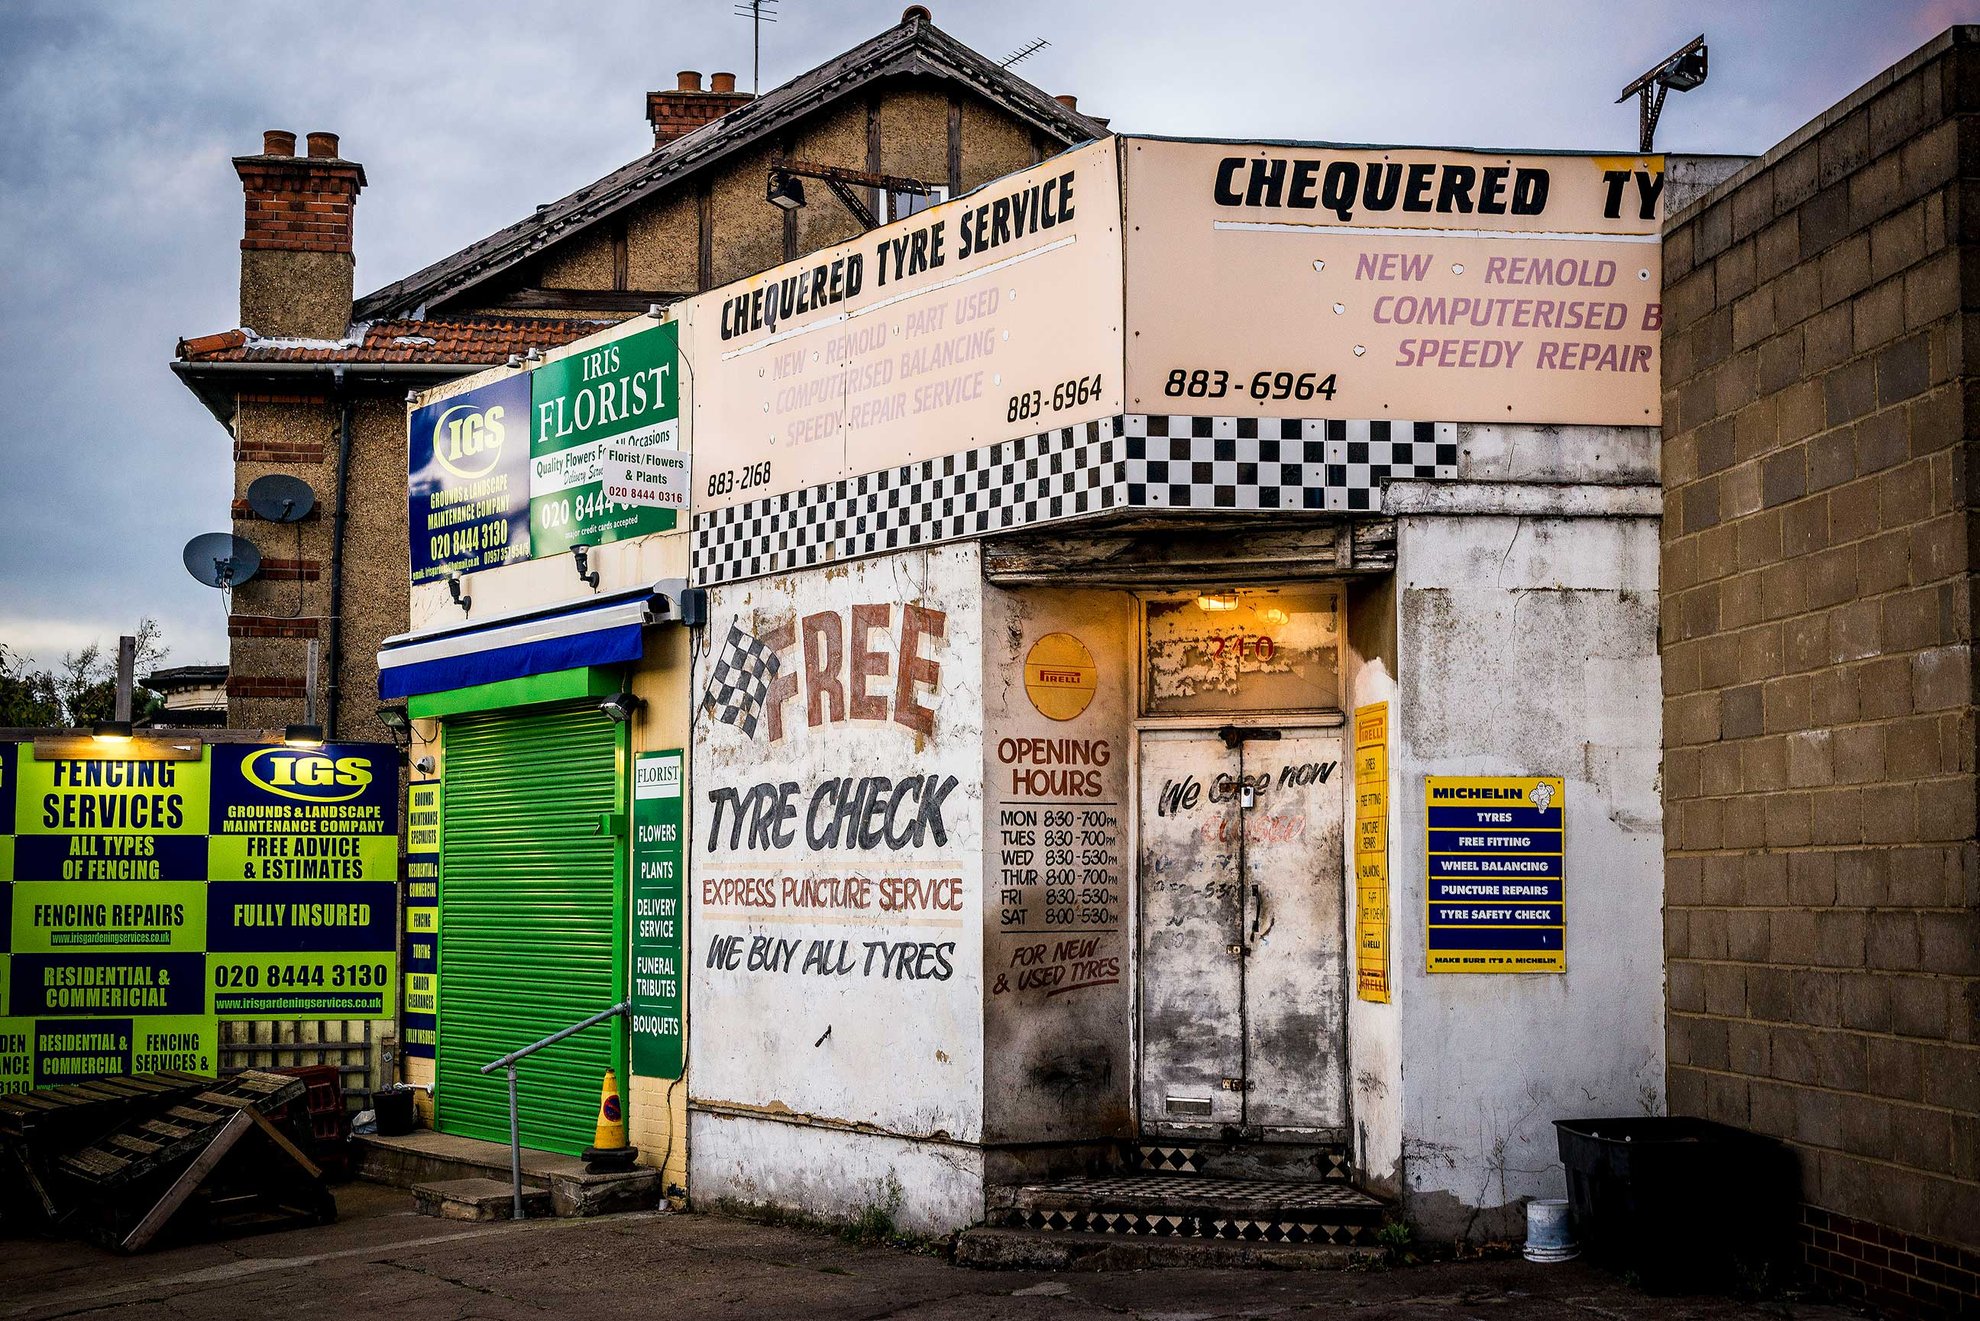 Chequered Tyre Service, East Finchley